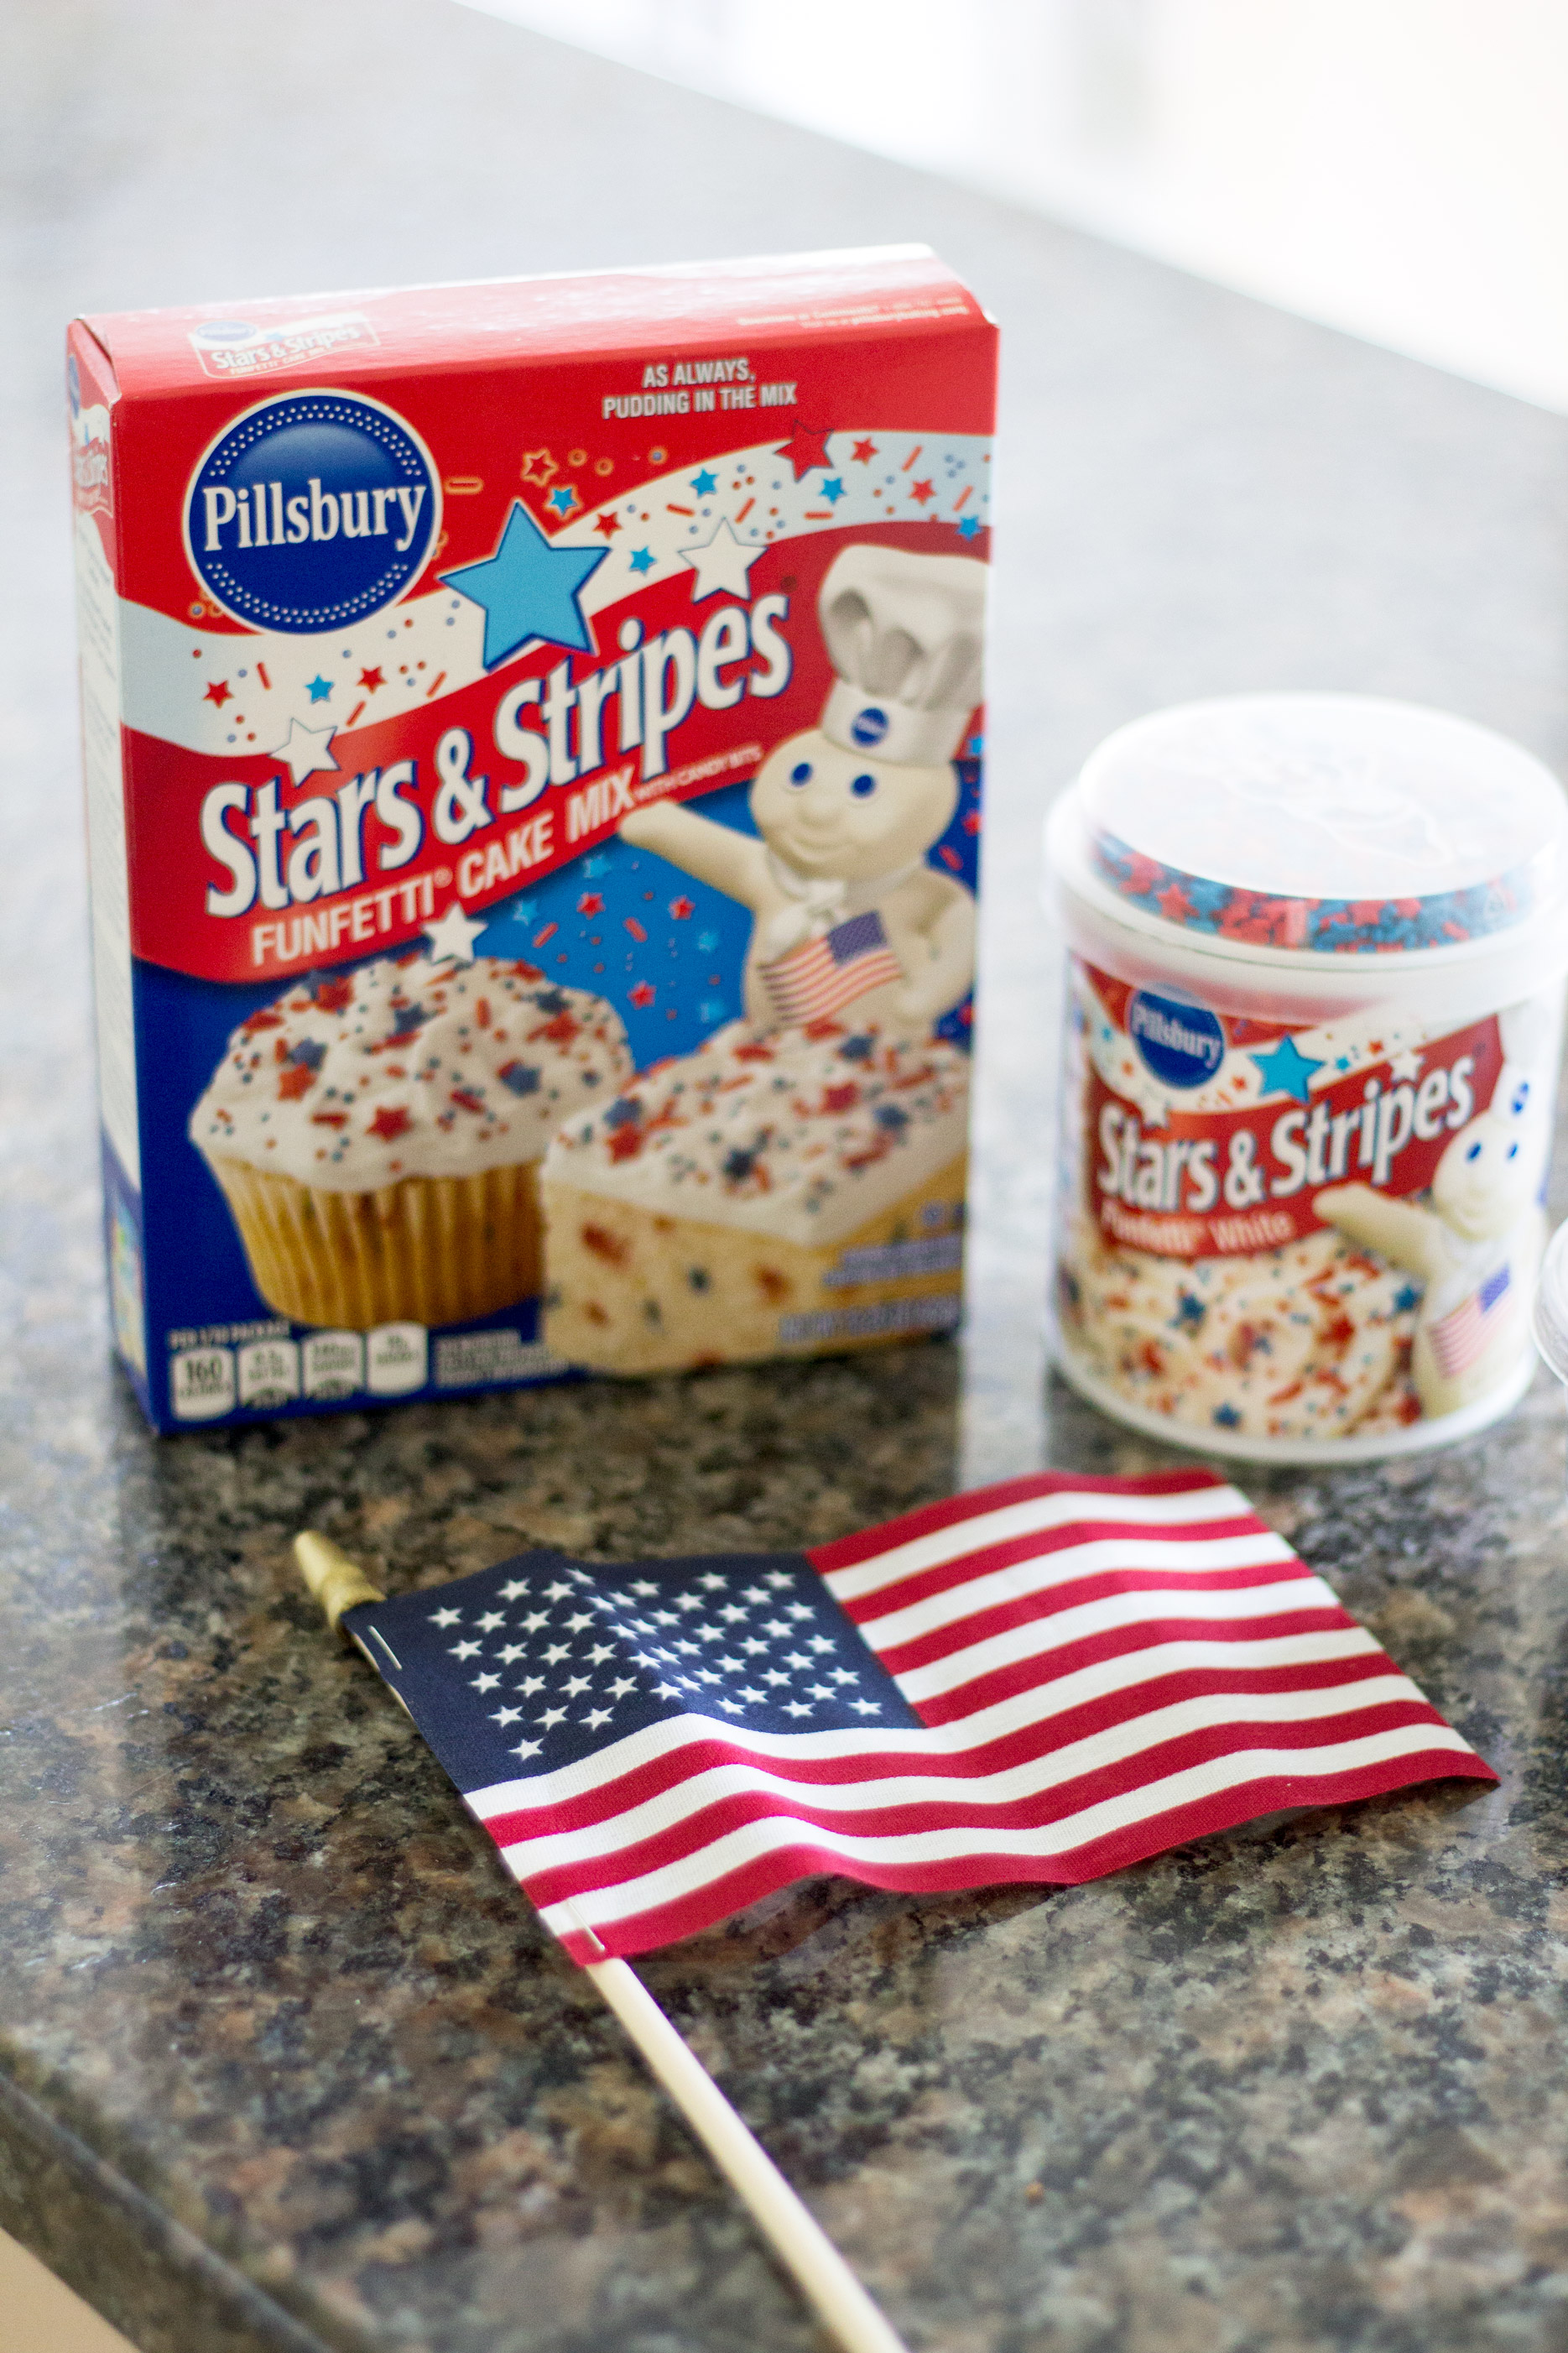 The Best of July 4th Sales and Goodies